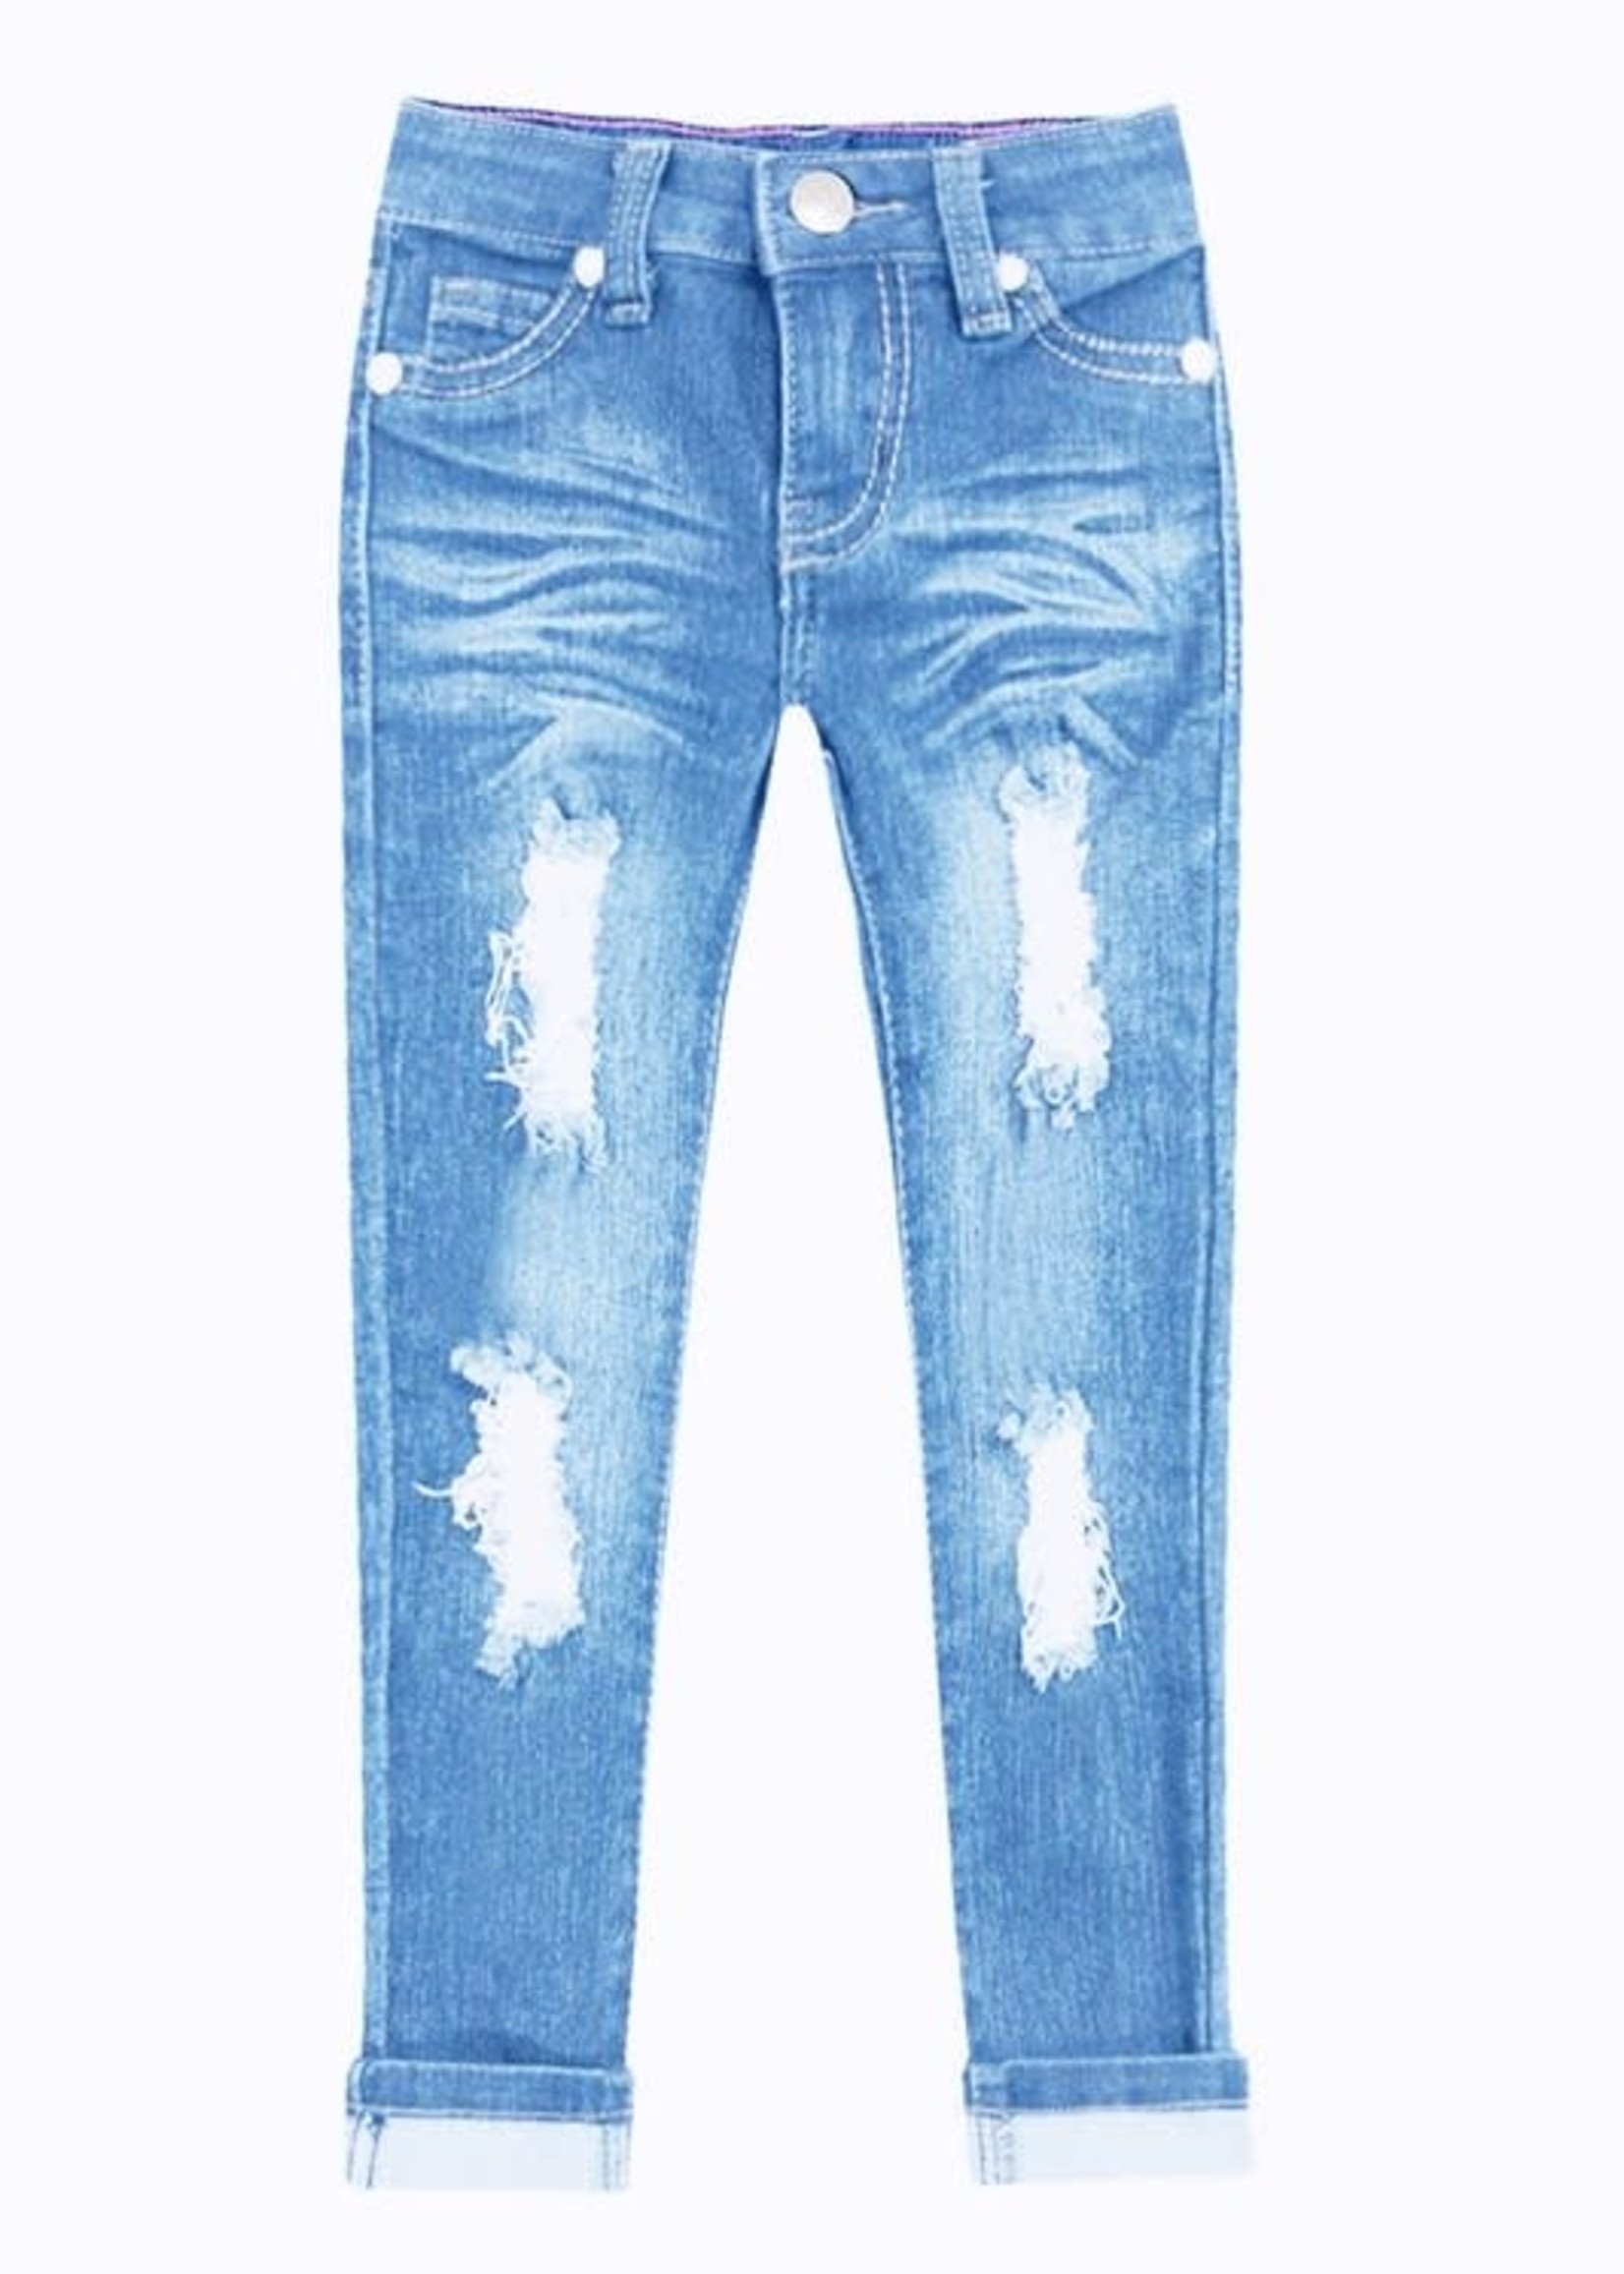 Bonnie Bianca Girl's Distressed Jeans with Wide Cuff